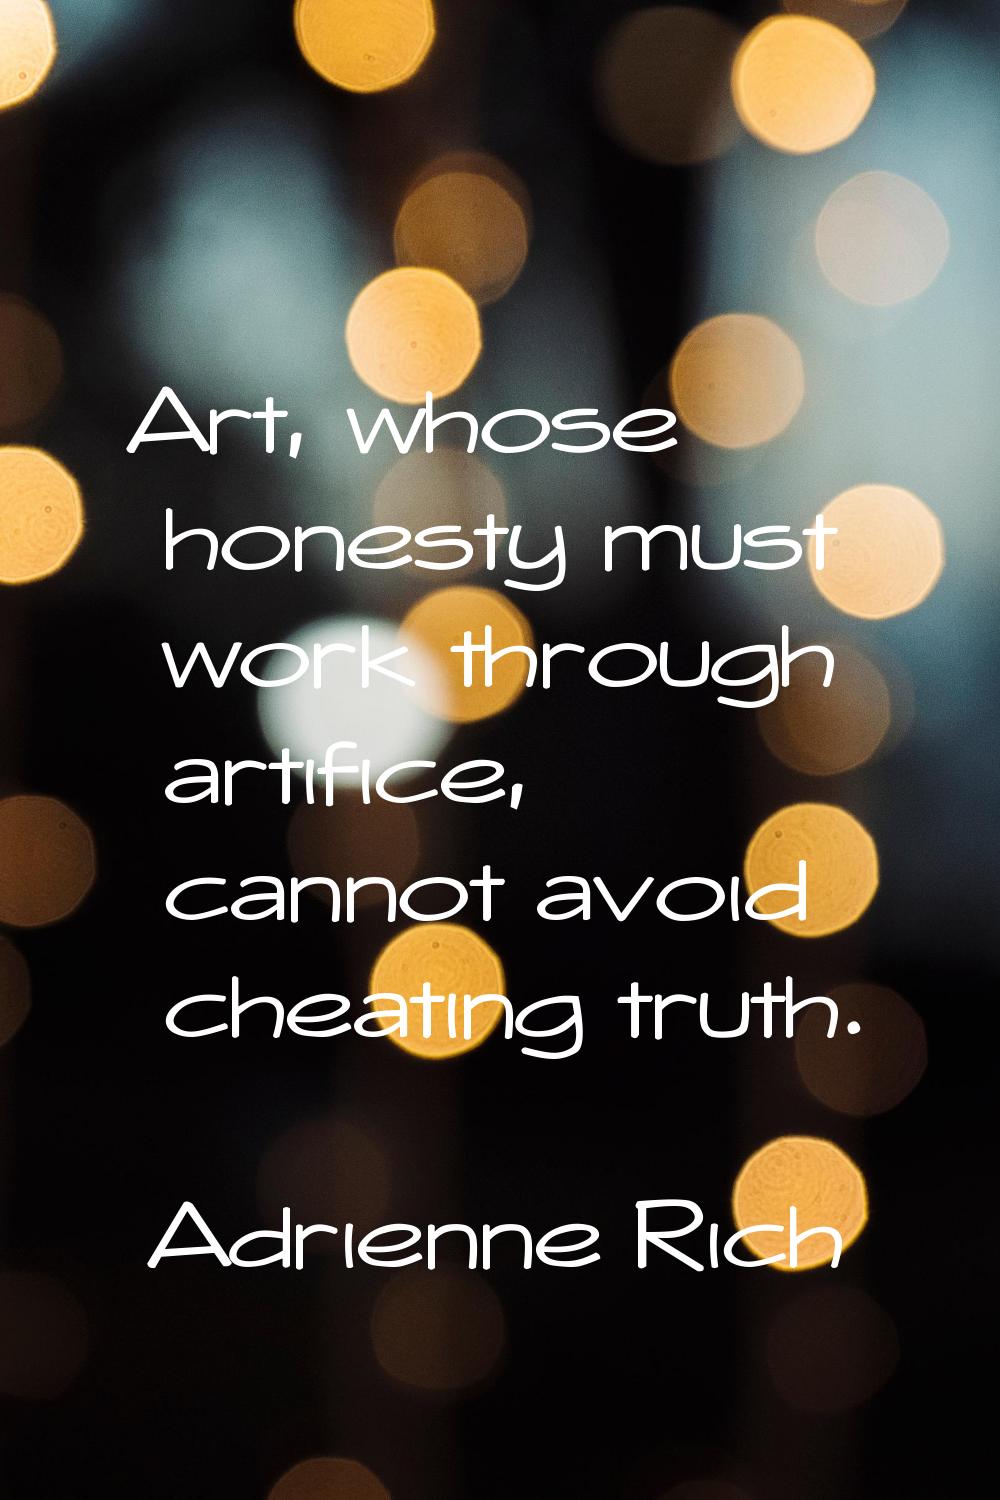 Art, whose honesty must work through artifice, cannot avoid cheating truth.